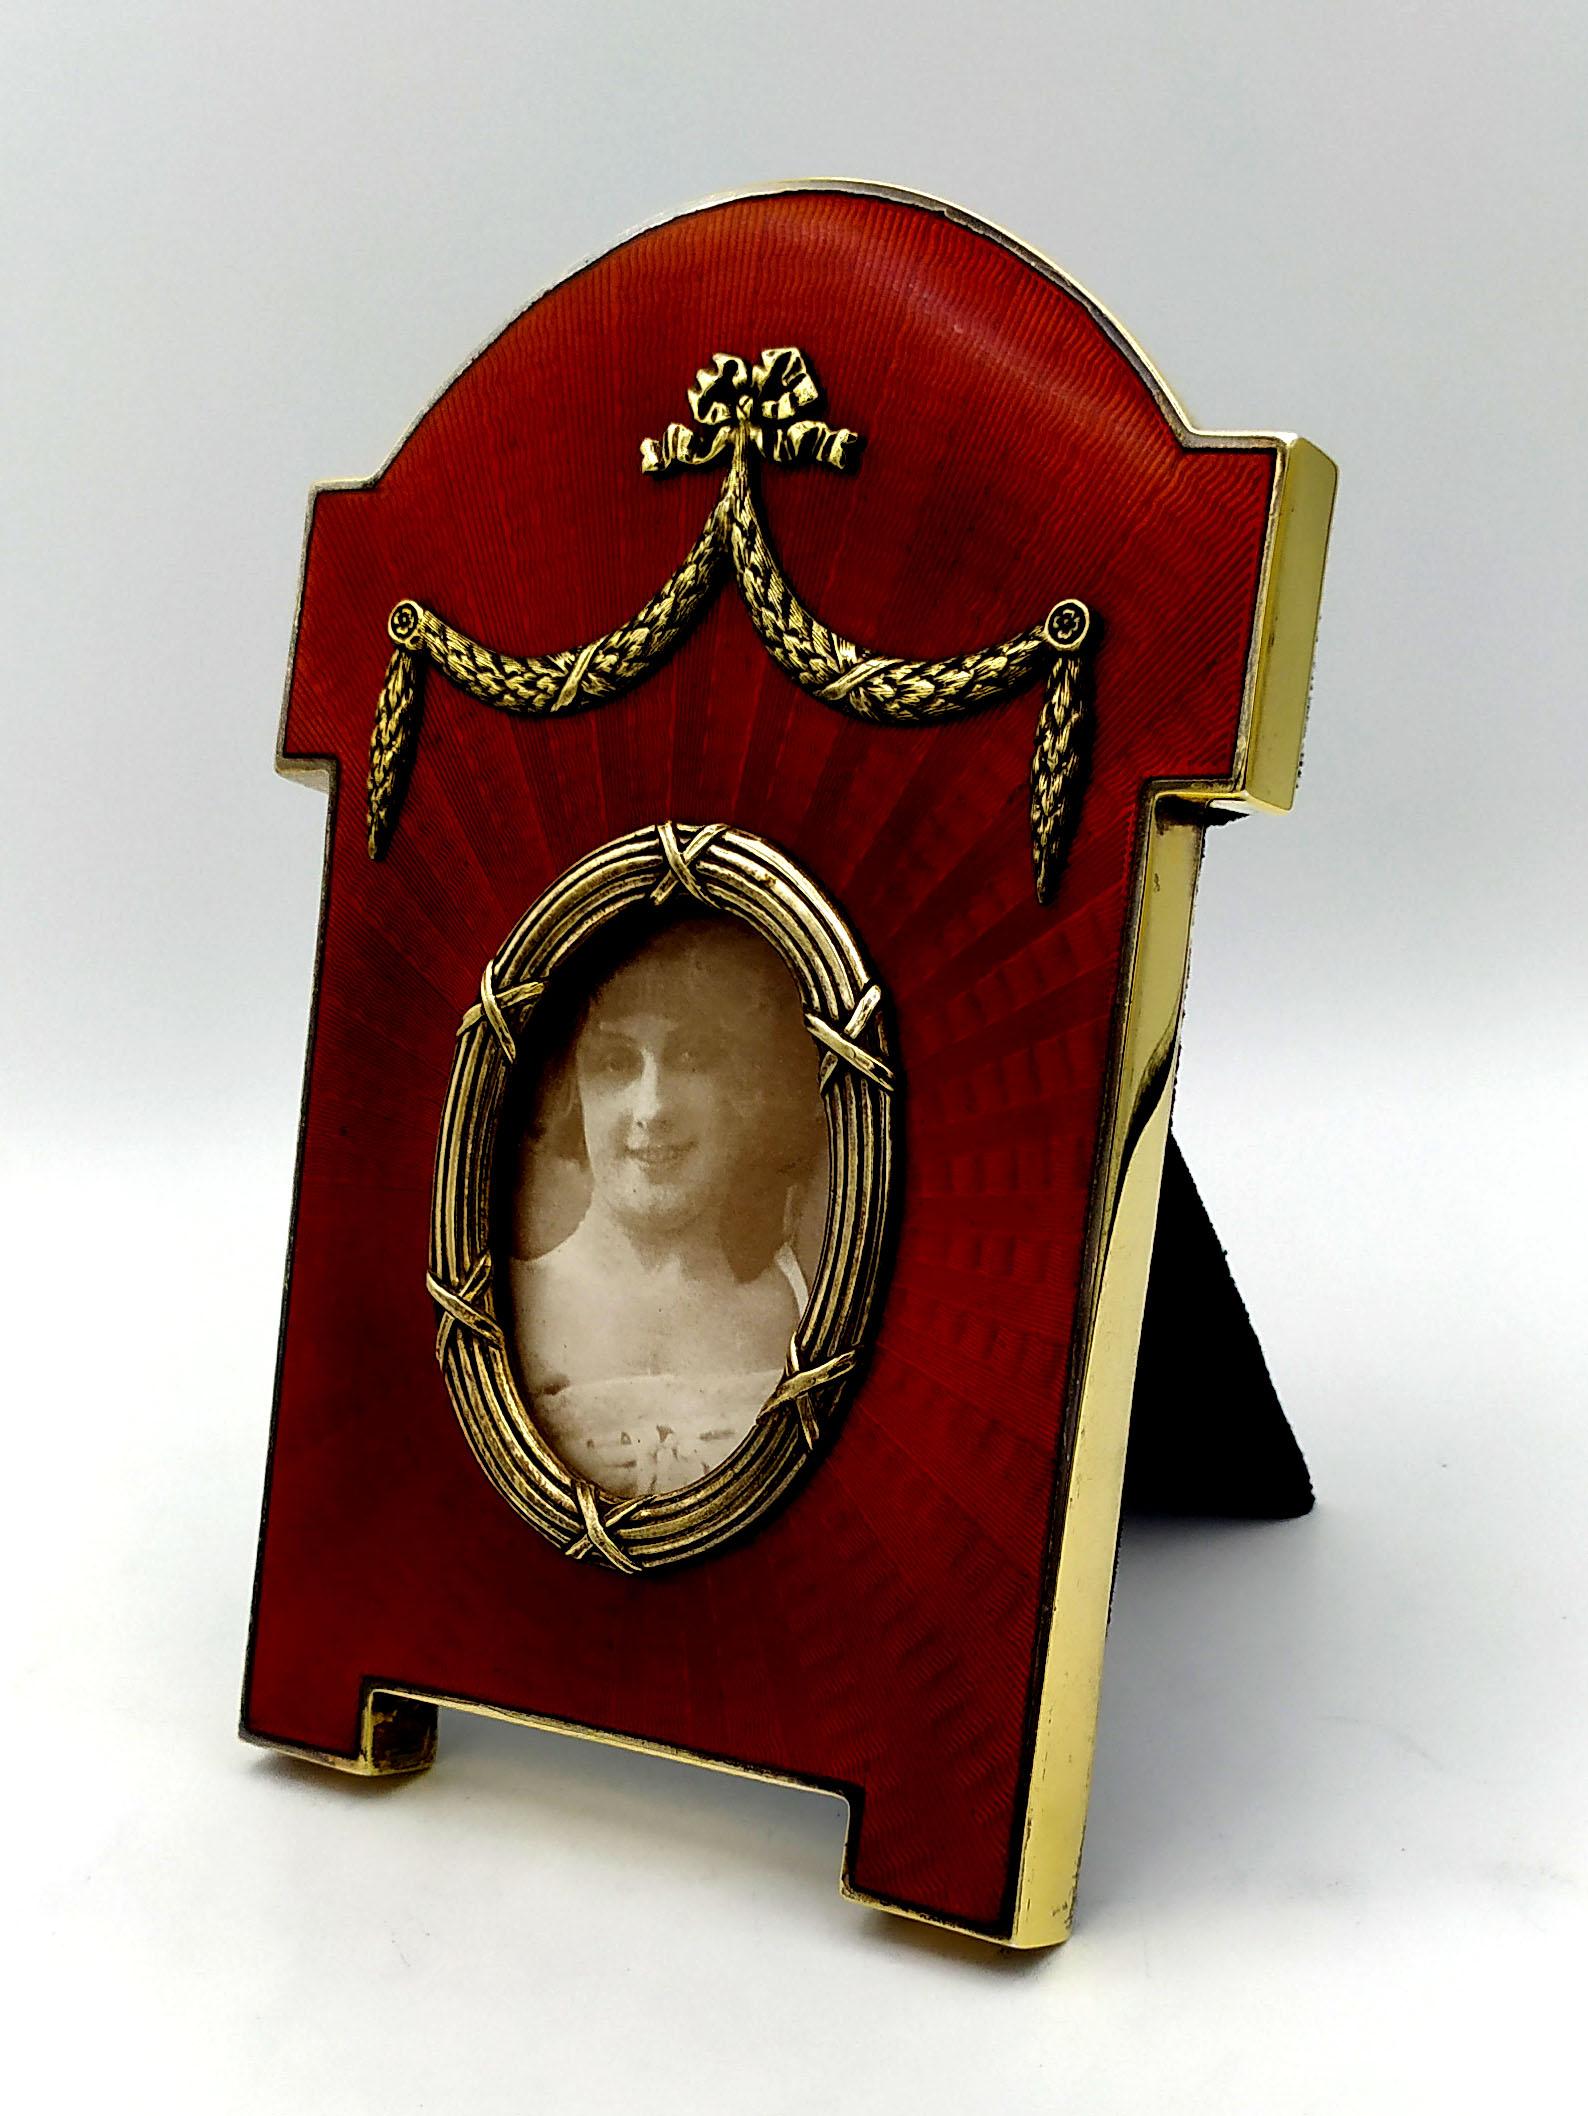 Shaped oval photo frame in 925/1000 sterling silver gold plated with translucent fired enamel on sunburst guillochè and Louis XVI French Empire style ornaments. External dimensions cm. 13.2 x 19., Internal oval cm. 4.7 x 6.7. Weight gr. 366.